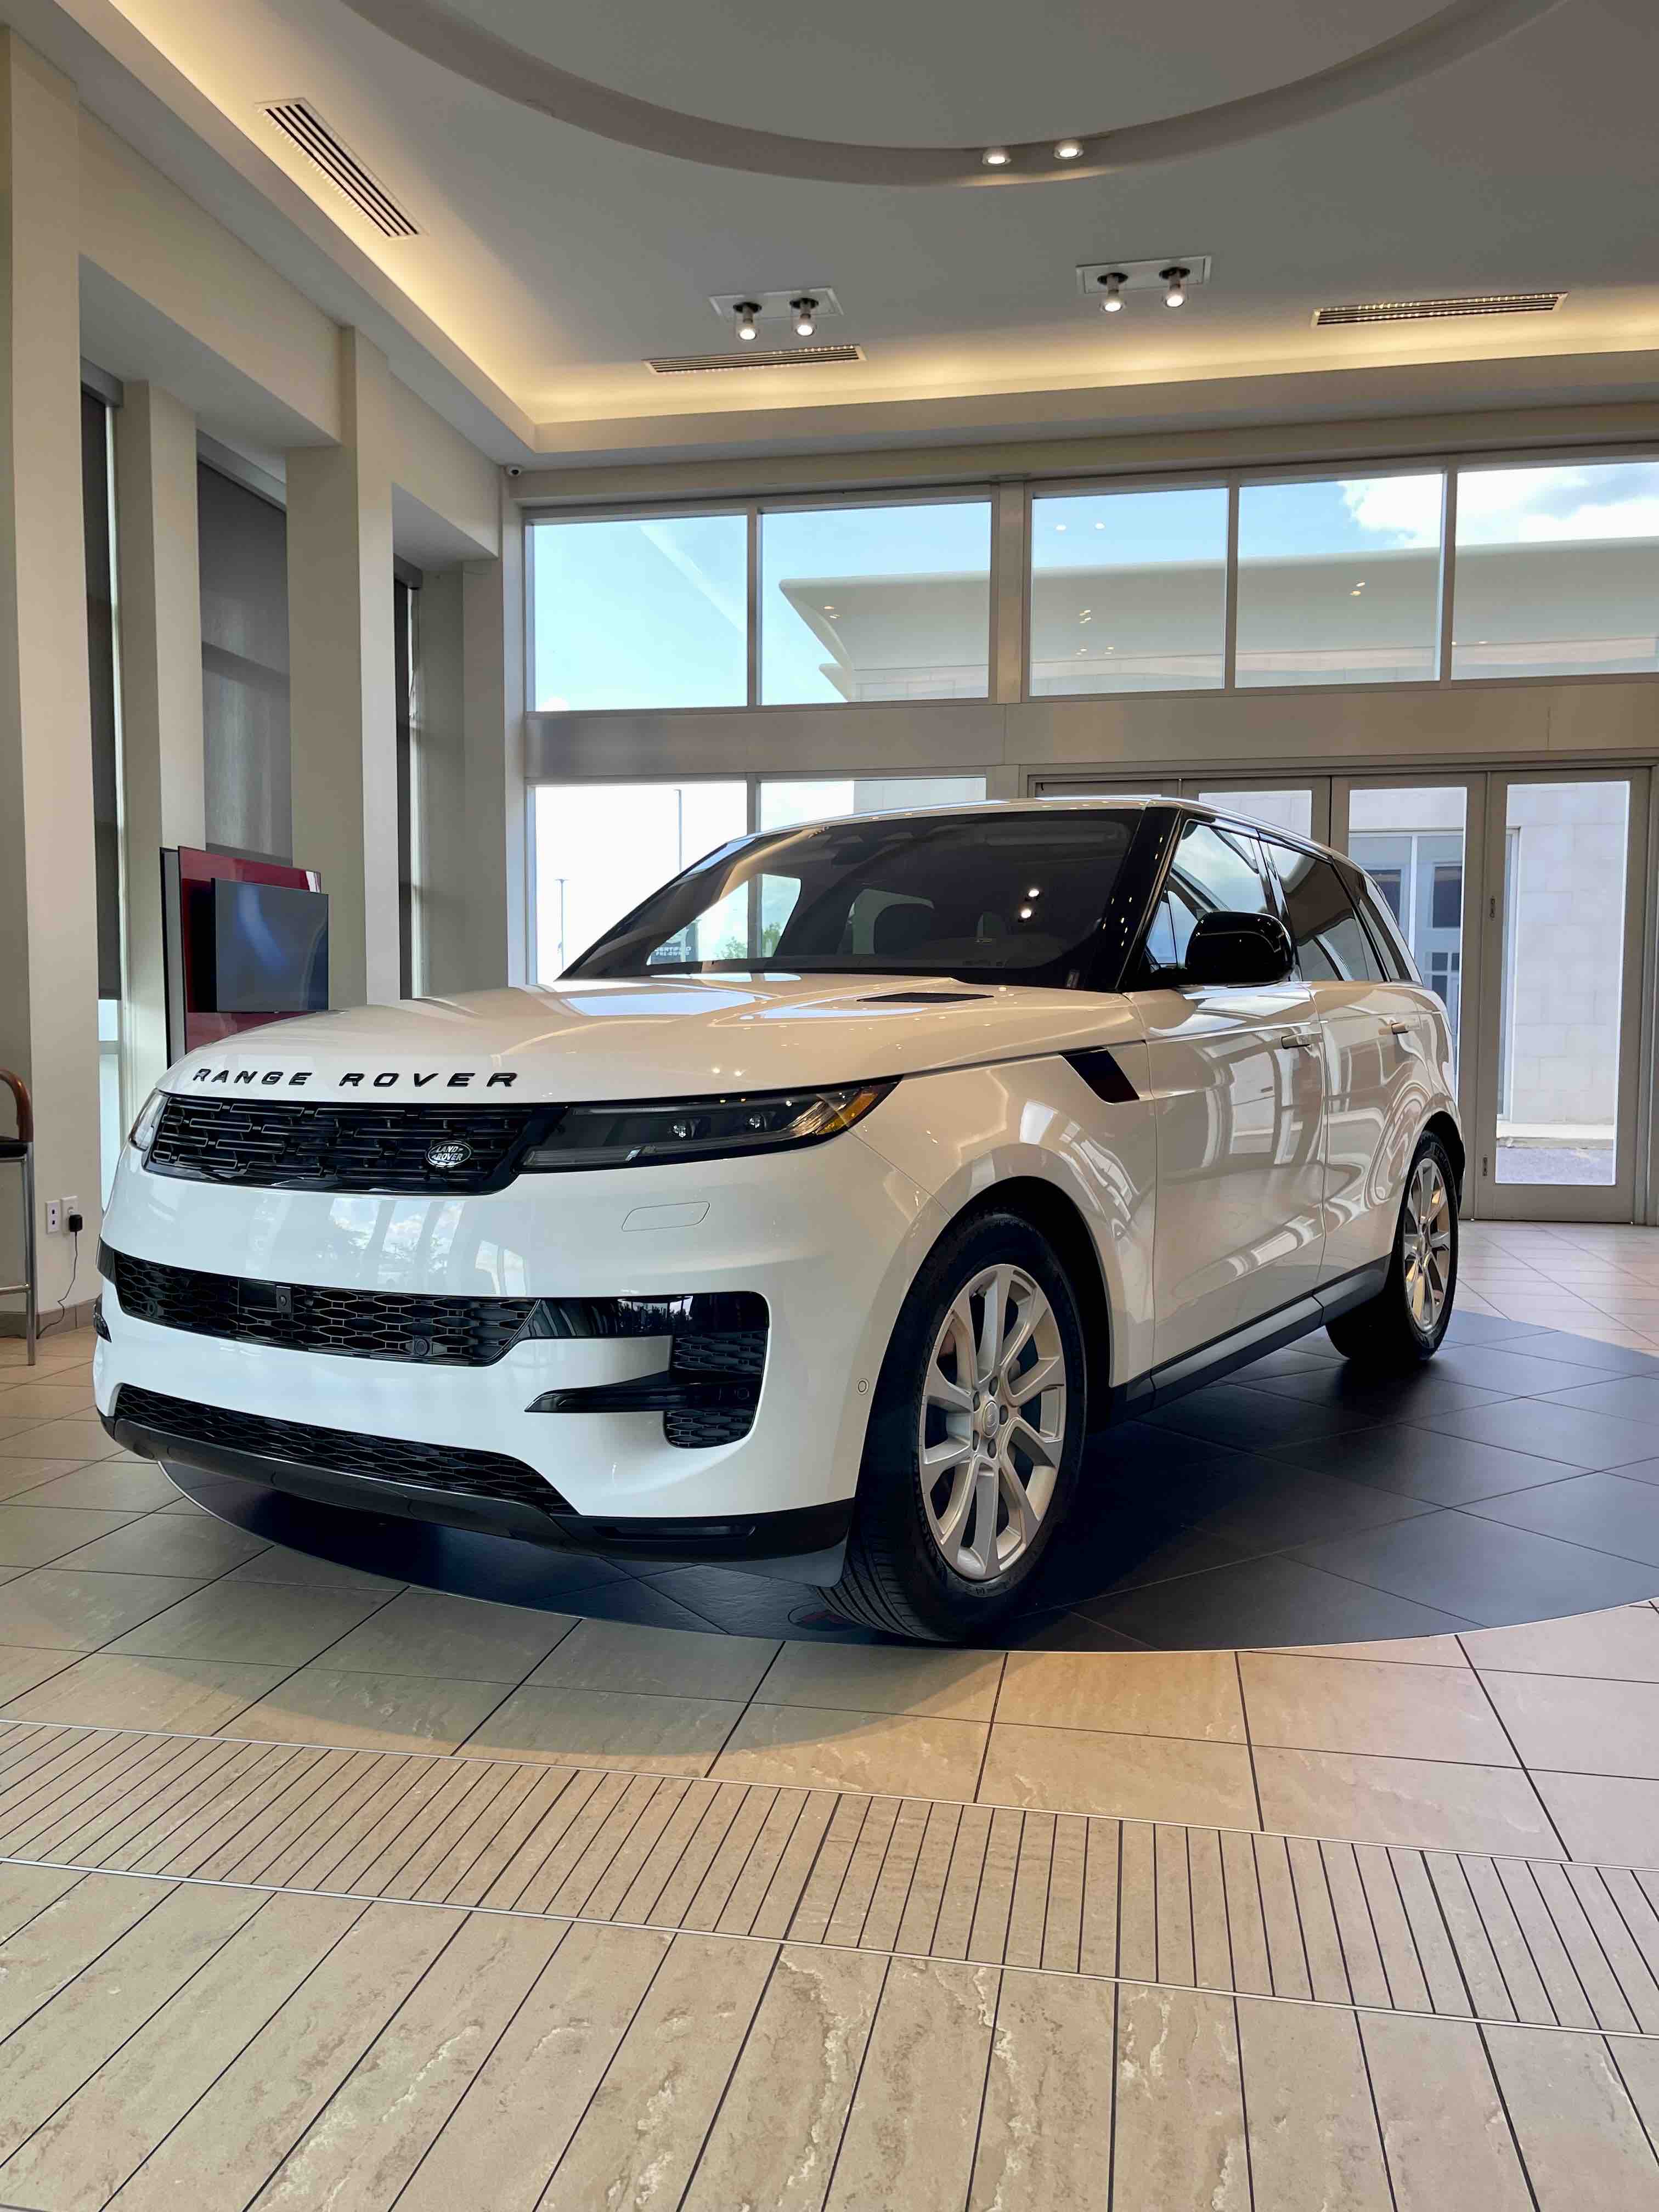 Land Rover Gulf Coast Mobile  Land Rover and Used Car Dealership Mobile, AL